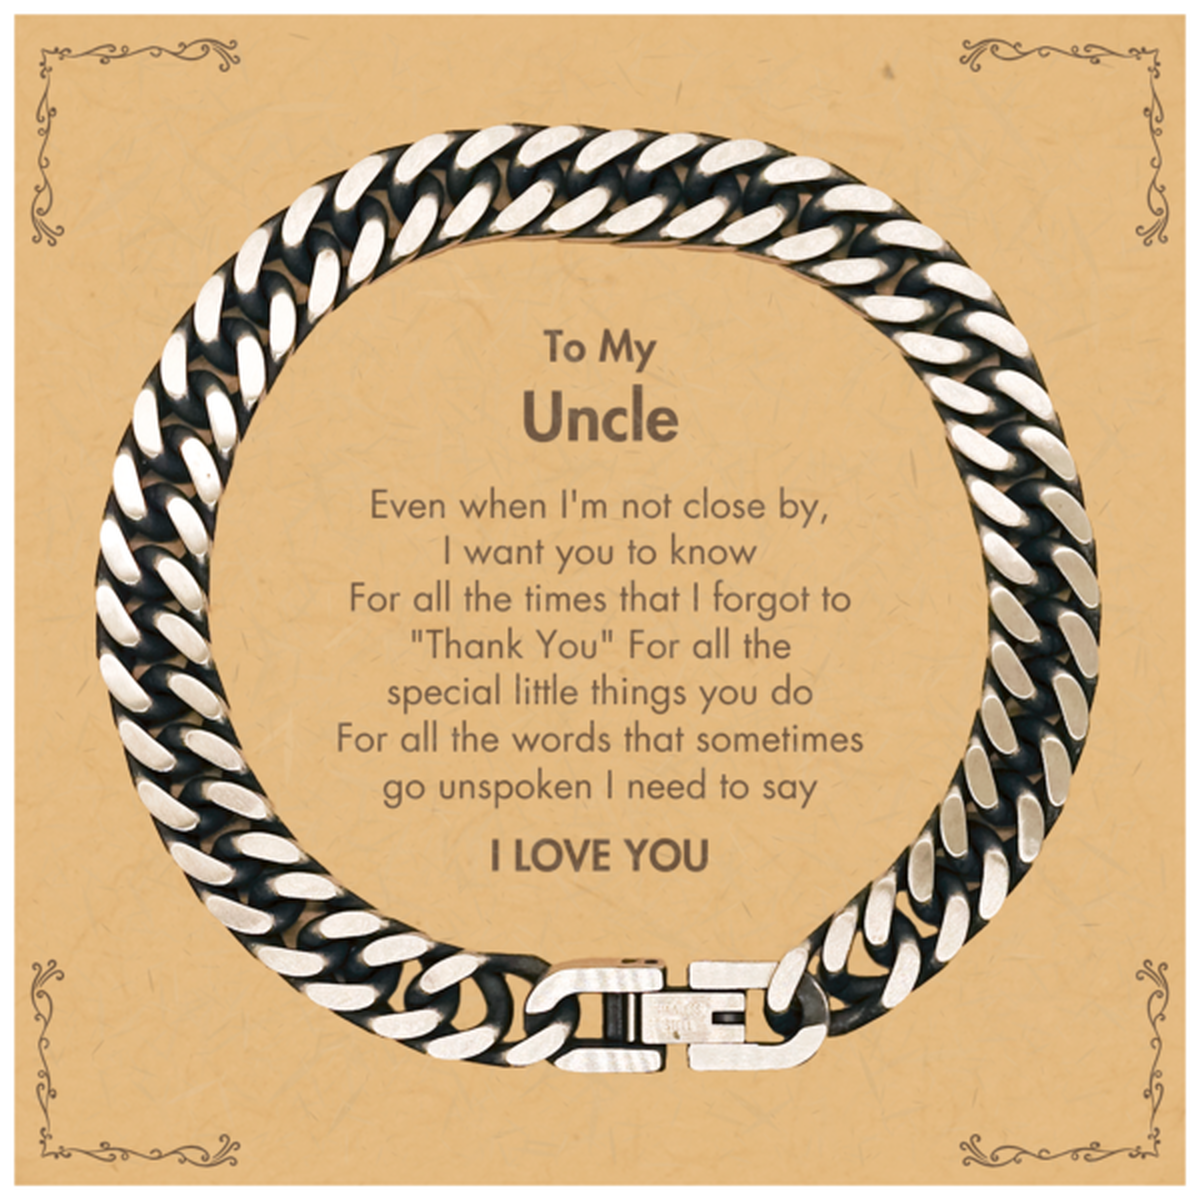 Thank You Gifts for Uncle, Keepsake Cuban Link Chain Bracelet Gifts for Uncle Birthday Mother's day Father's Day Uncle For all the words That sometimes go unspoken I need to say I LOVE YOU